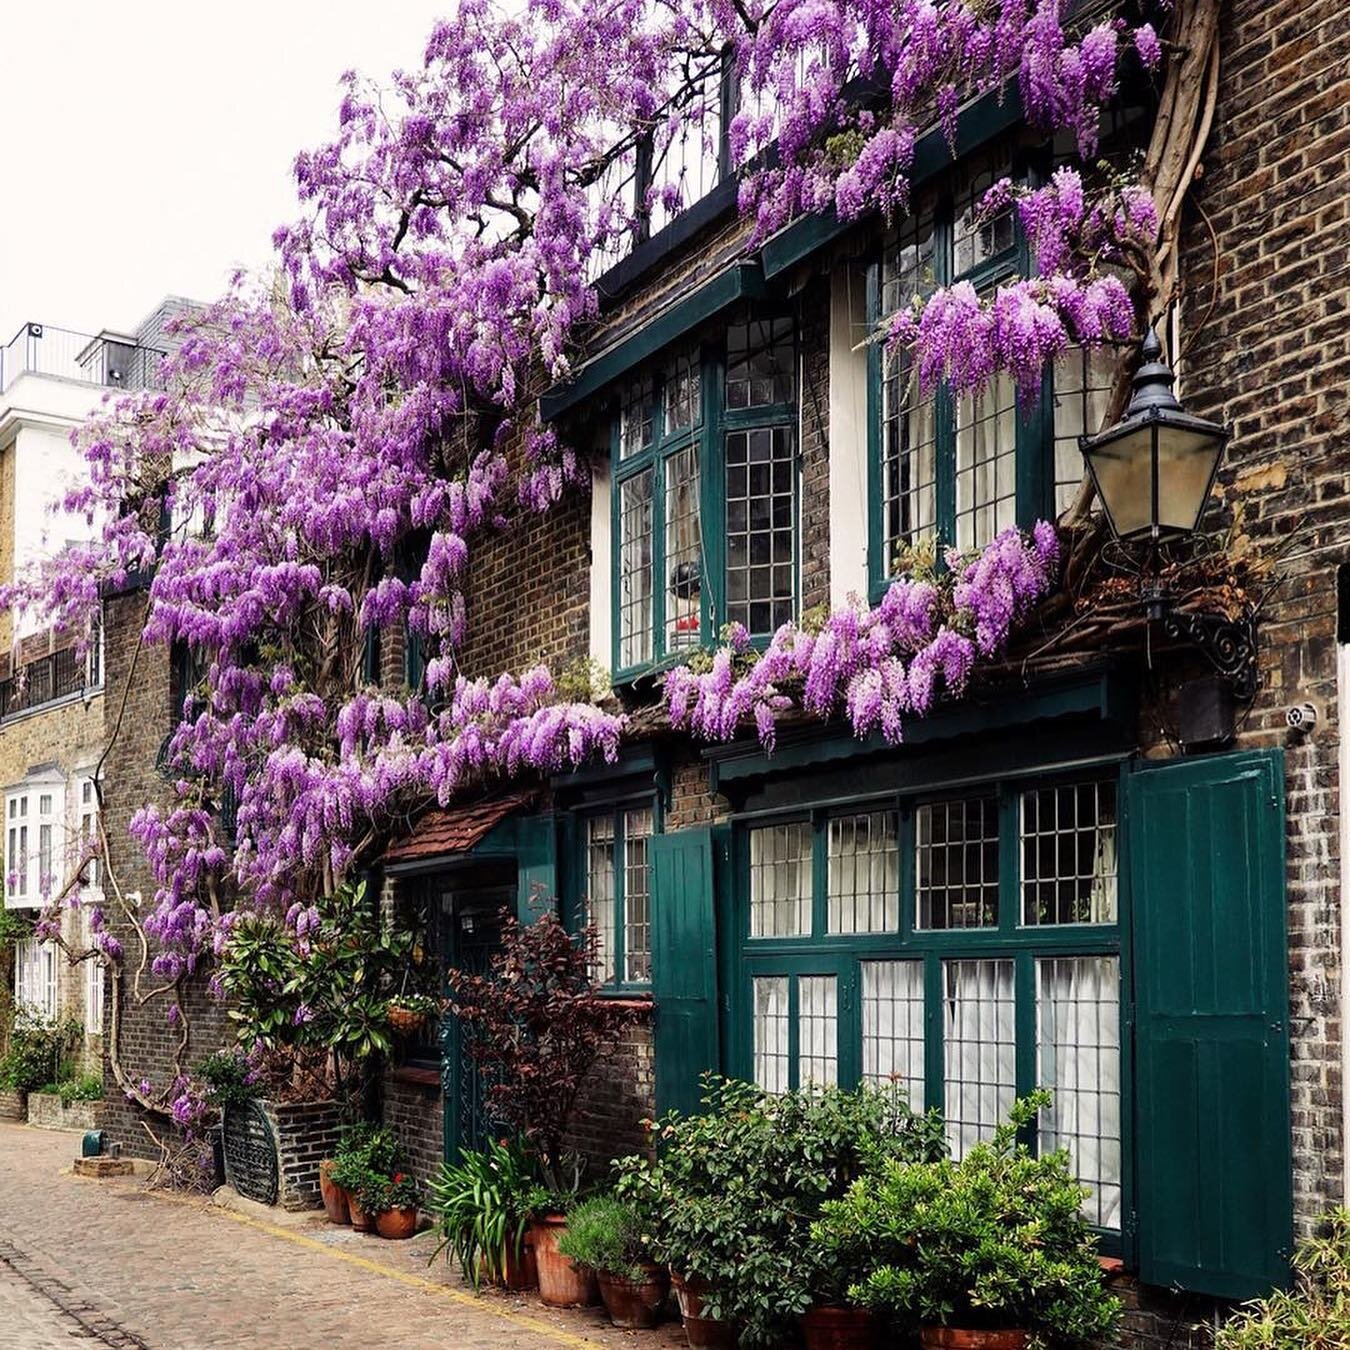 Purple Reign: Exploring the Best Wisteria Spots in London

As the days start to get warmer and the skies turn blue, Londoners start looking forward to the beautiful spring season. One of the most iconic sights of spring in London is the blooming of t